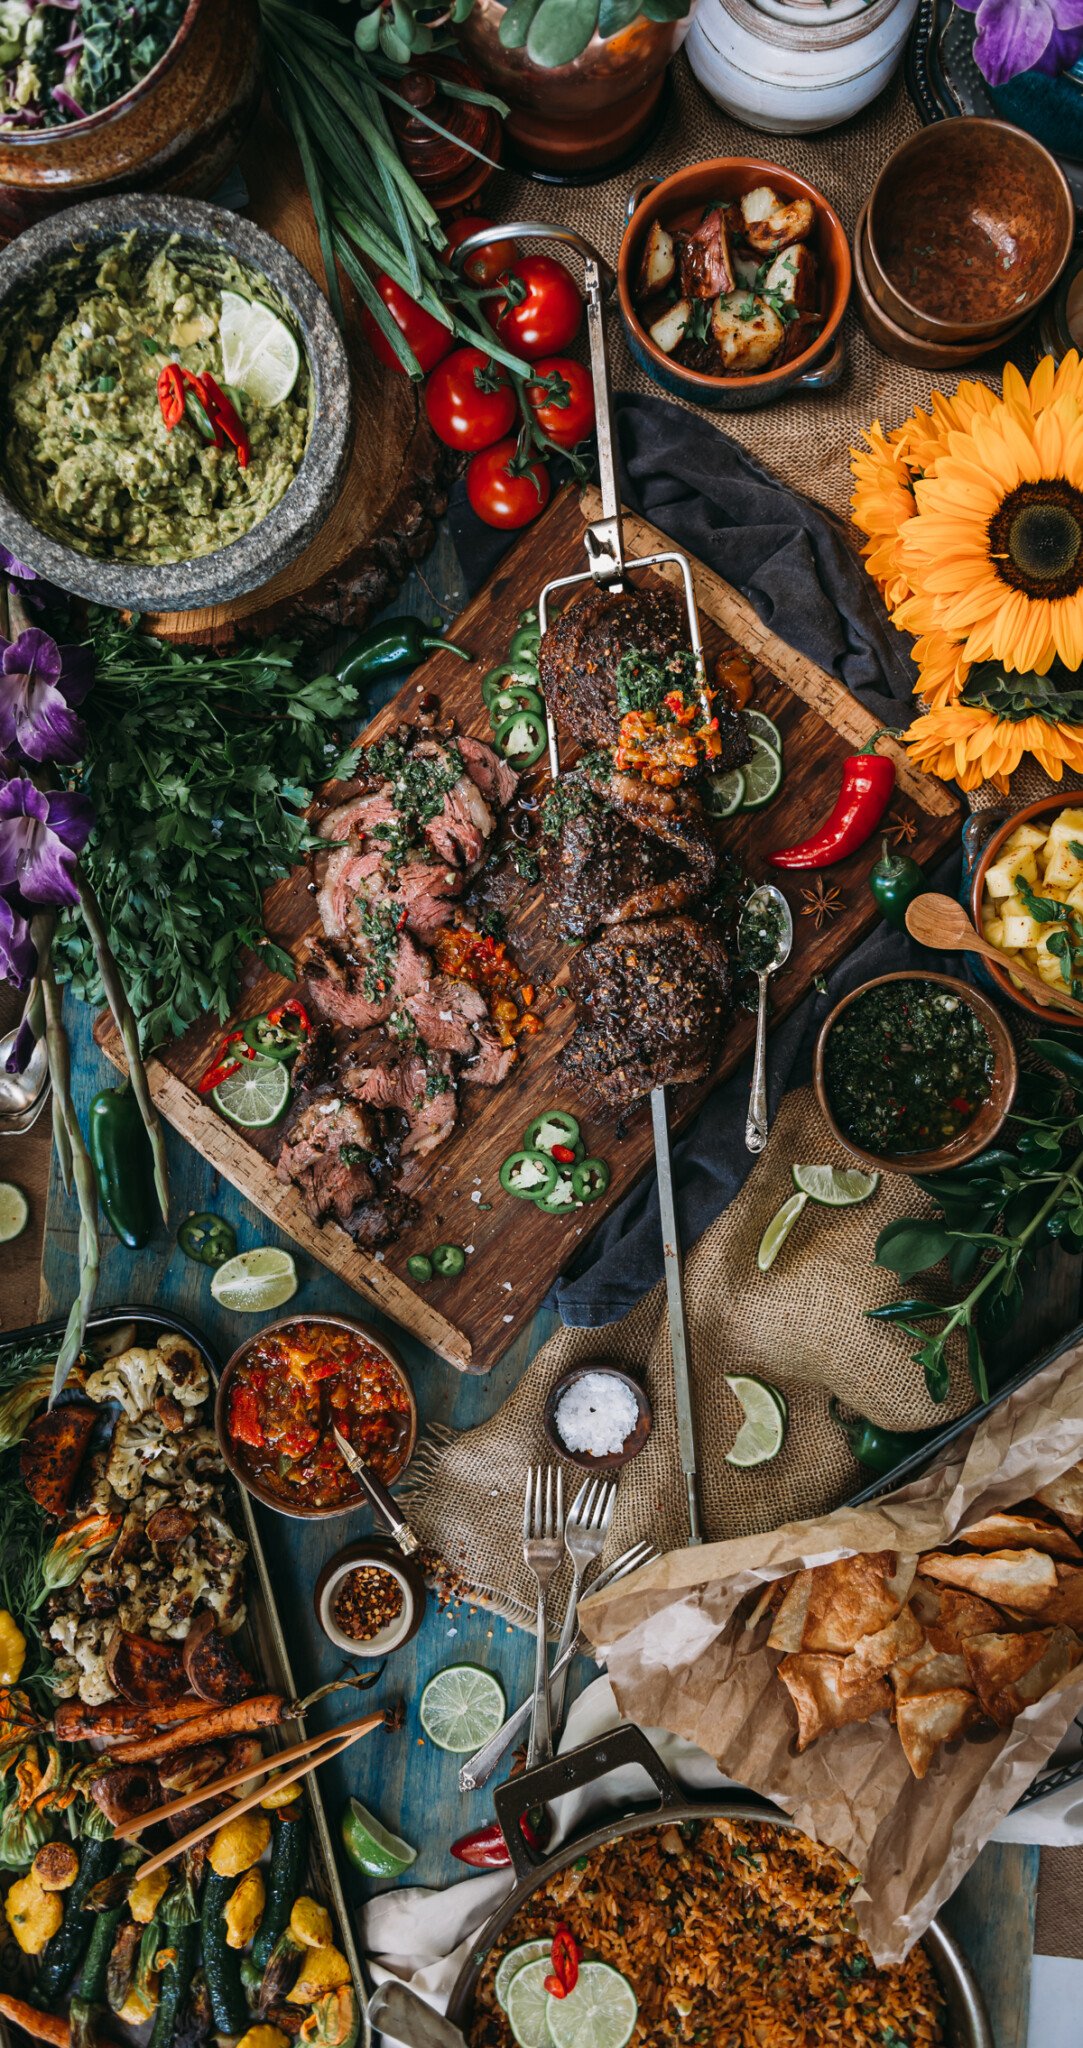 huge spread of food centered around a rotisserie beef picanha with side dishes, flowers and various sauces